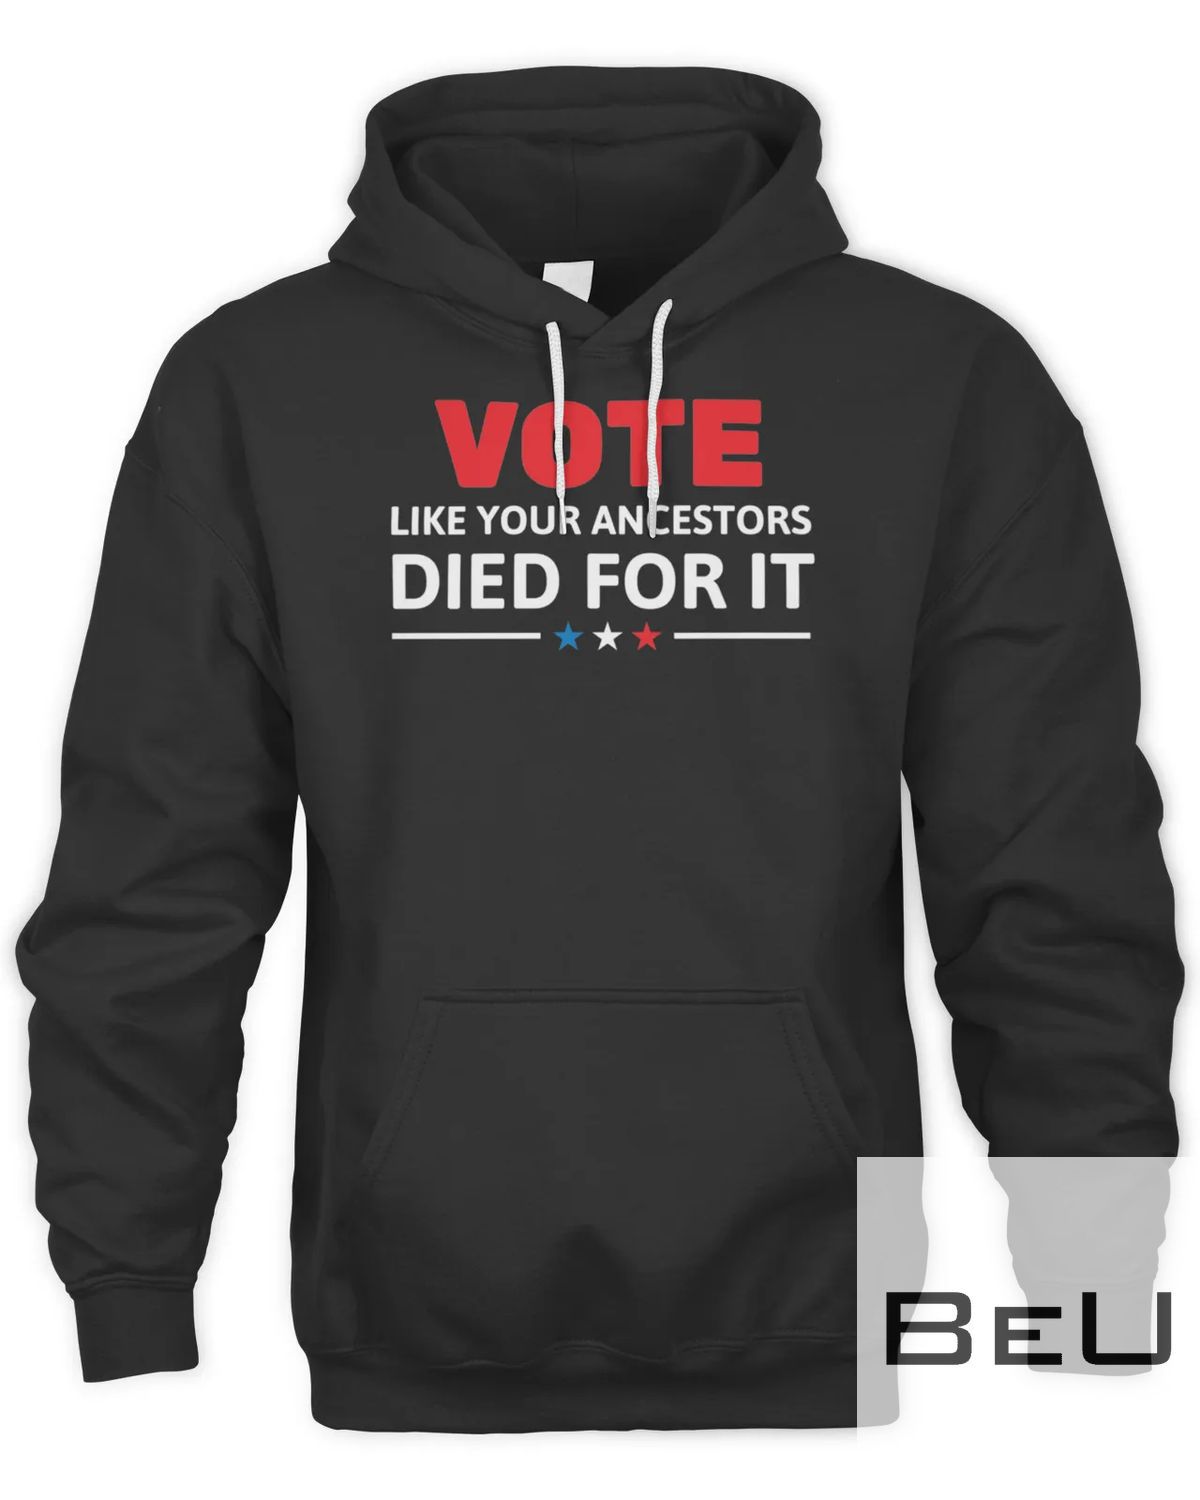 Official Vote Like Your Ancestors Died For It - Black Voters Matter T-shirt